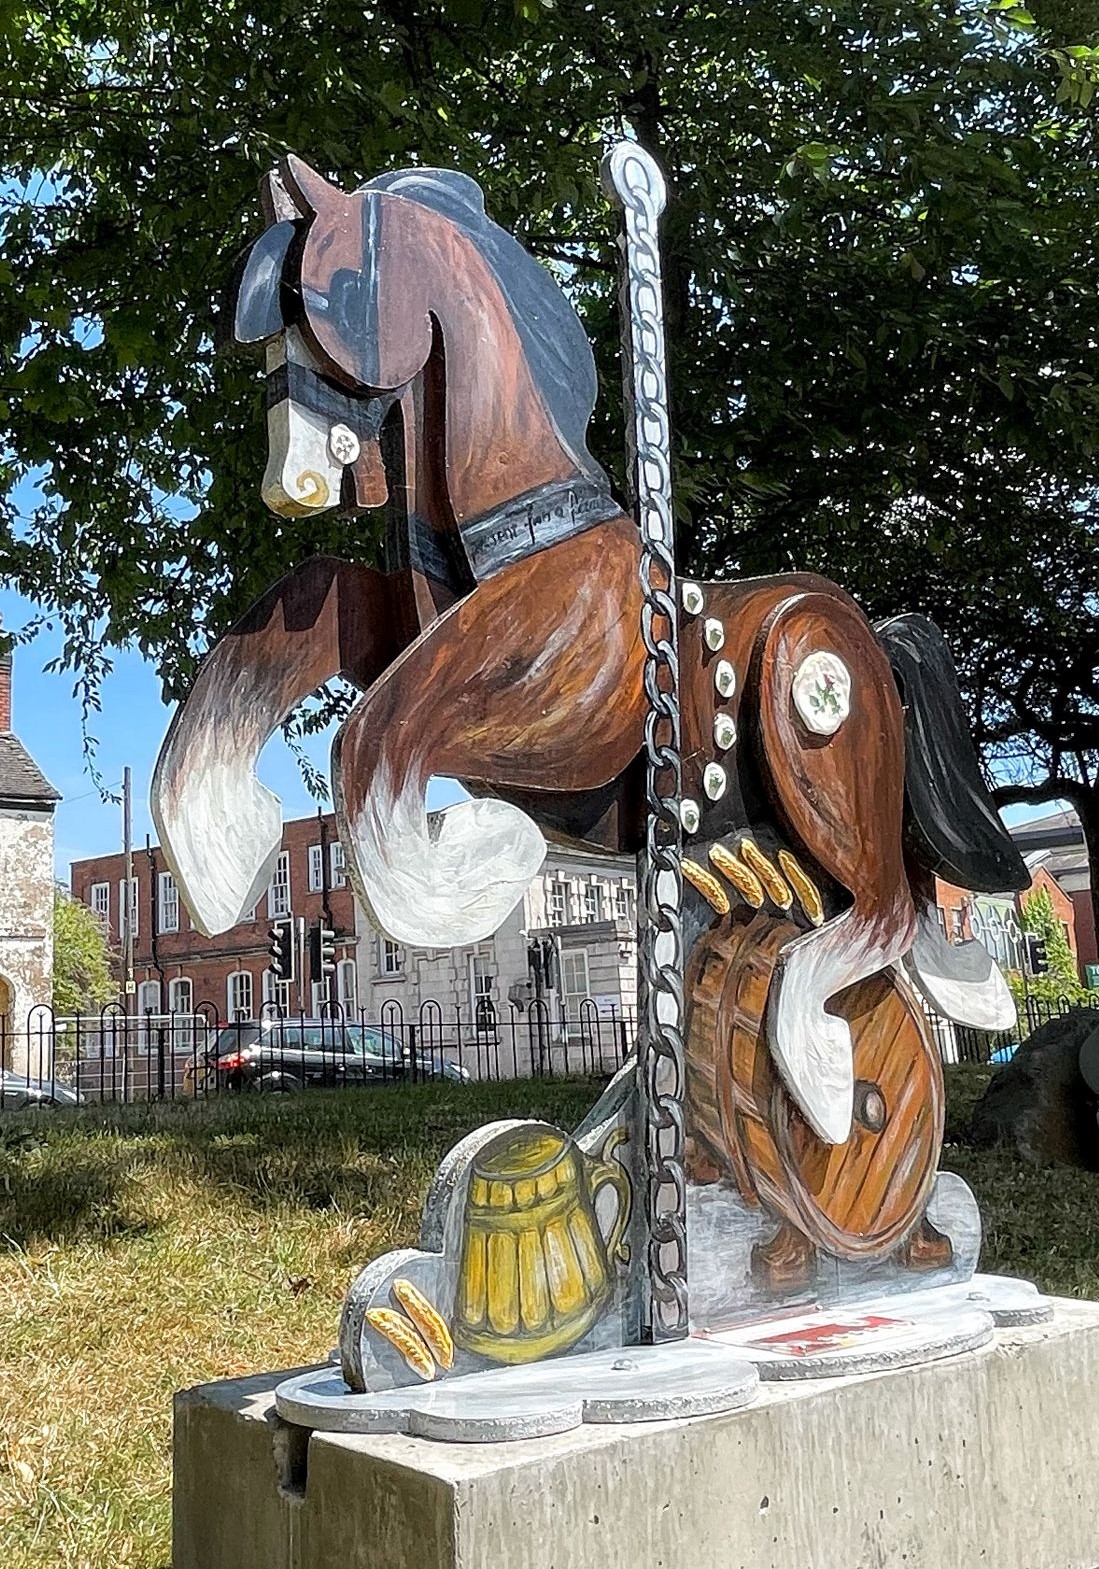 Shire Horse, Designed by Joanna Dawidowska, Sponsored by The National Brewery Centre